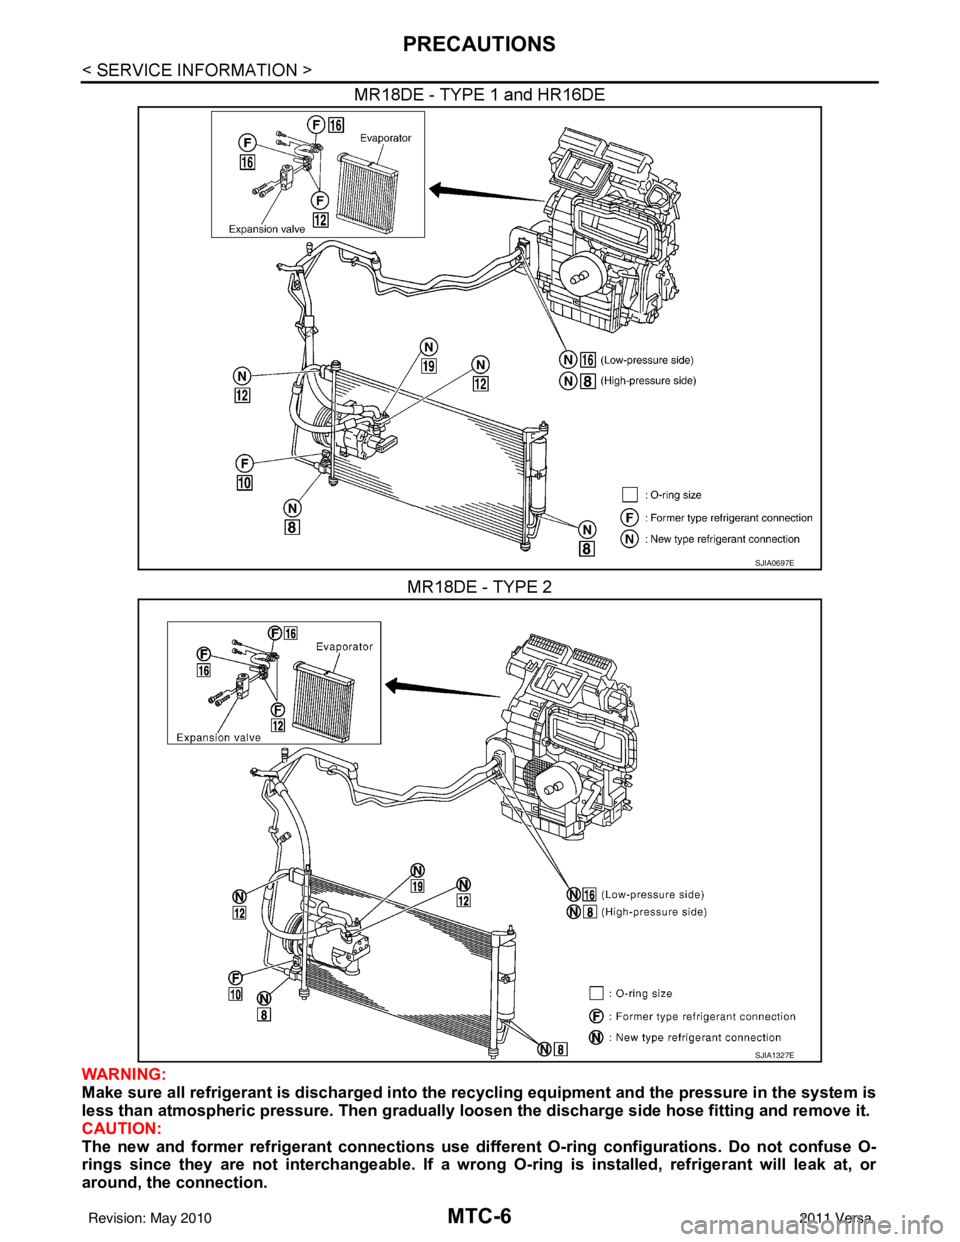 NISSAN LATIO 2011  Service Repair Manual MTC-6
< SERVICE INFORMATION >
PRECAUTIONS
MR18DE - TYPE 1 and HR16DEMR18DE - TYPE 2
WARNING:
Make sure all refrigerant is discharged into the  recycling equipment and the pressure in the system is
les